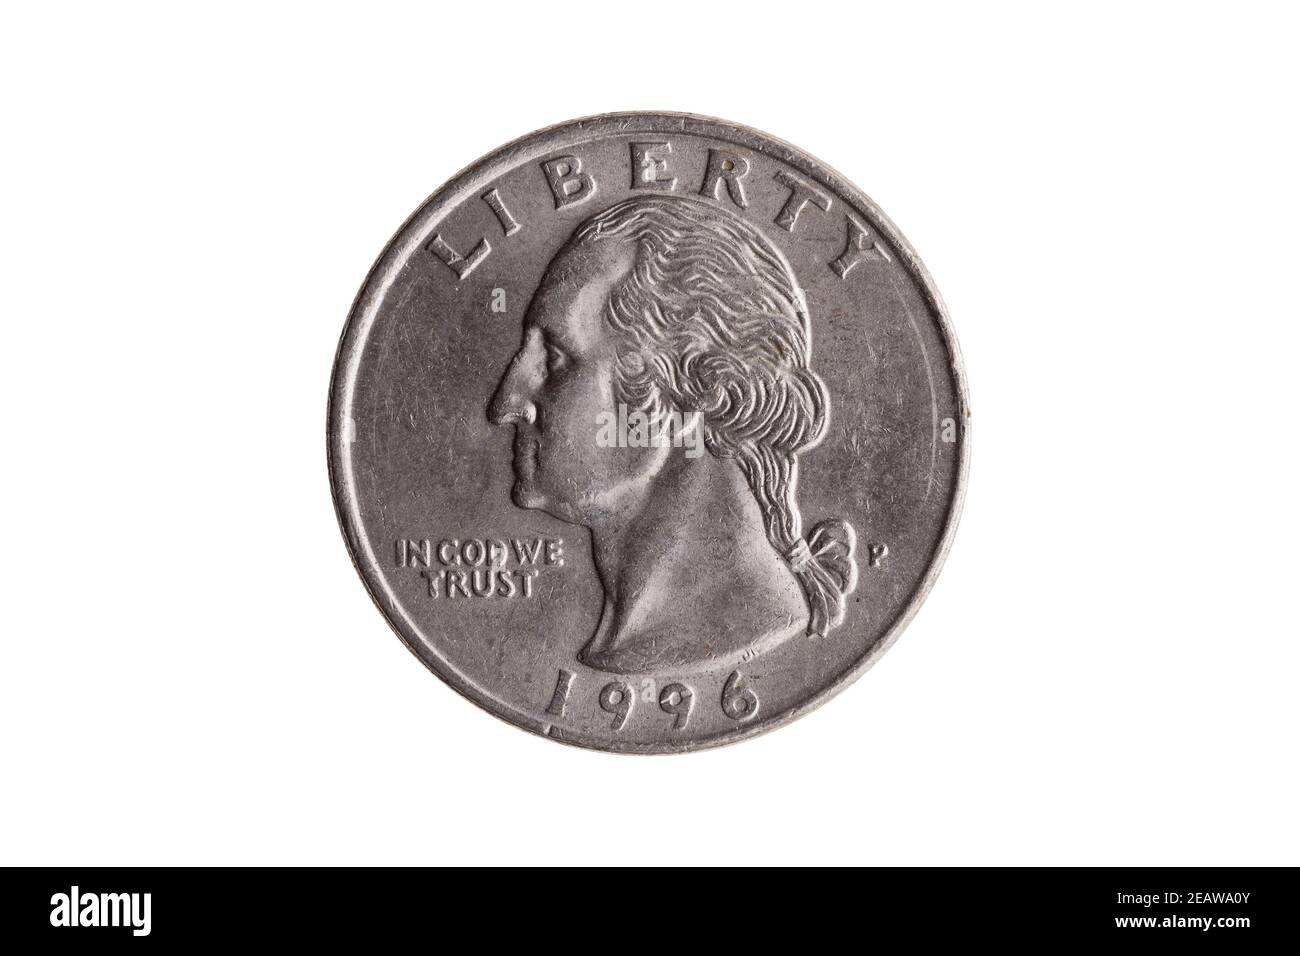 USA quarter dollar nickel coin (25 cents) with a portrait image of George Washington cut out and isolated Stock Photo